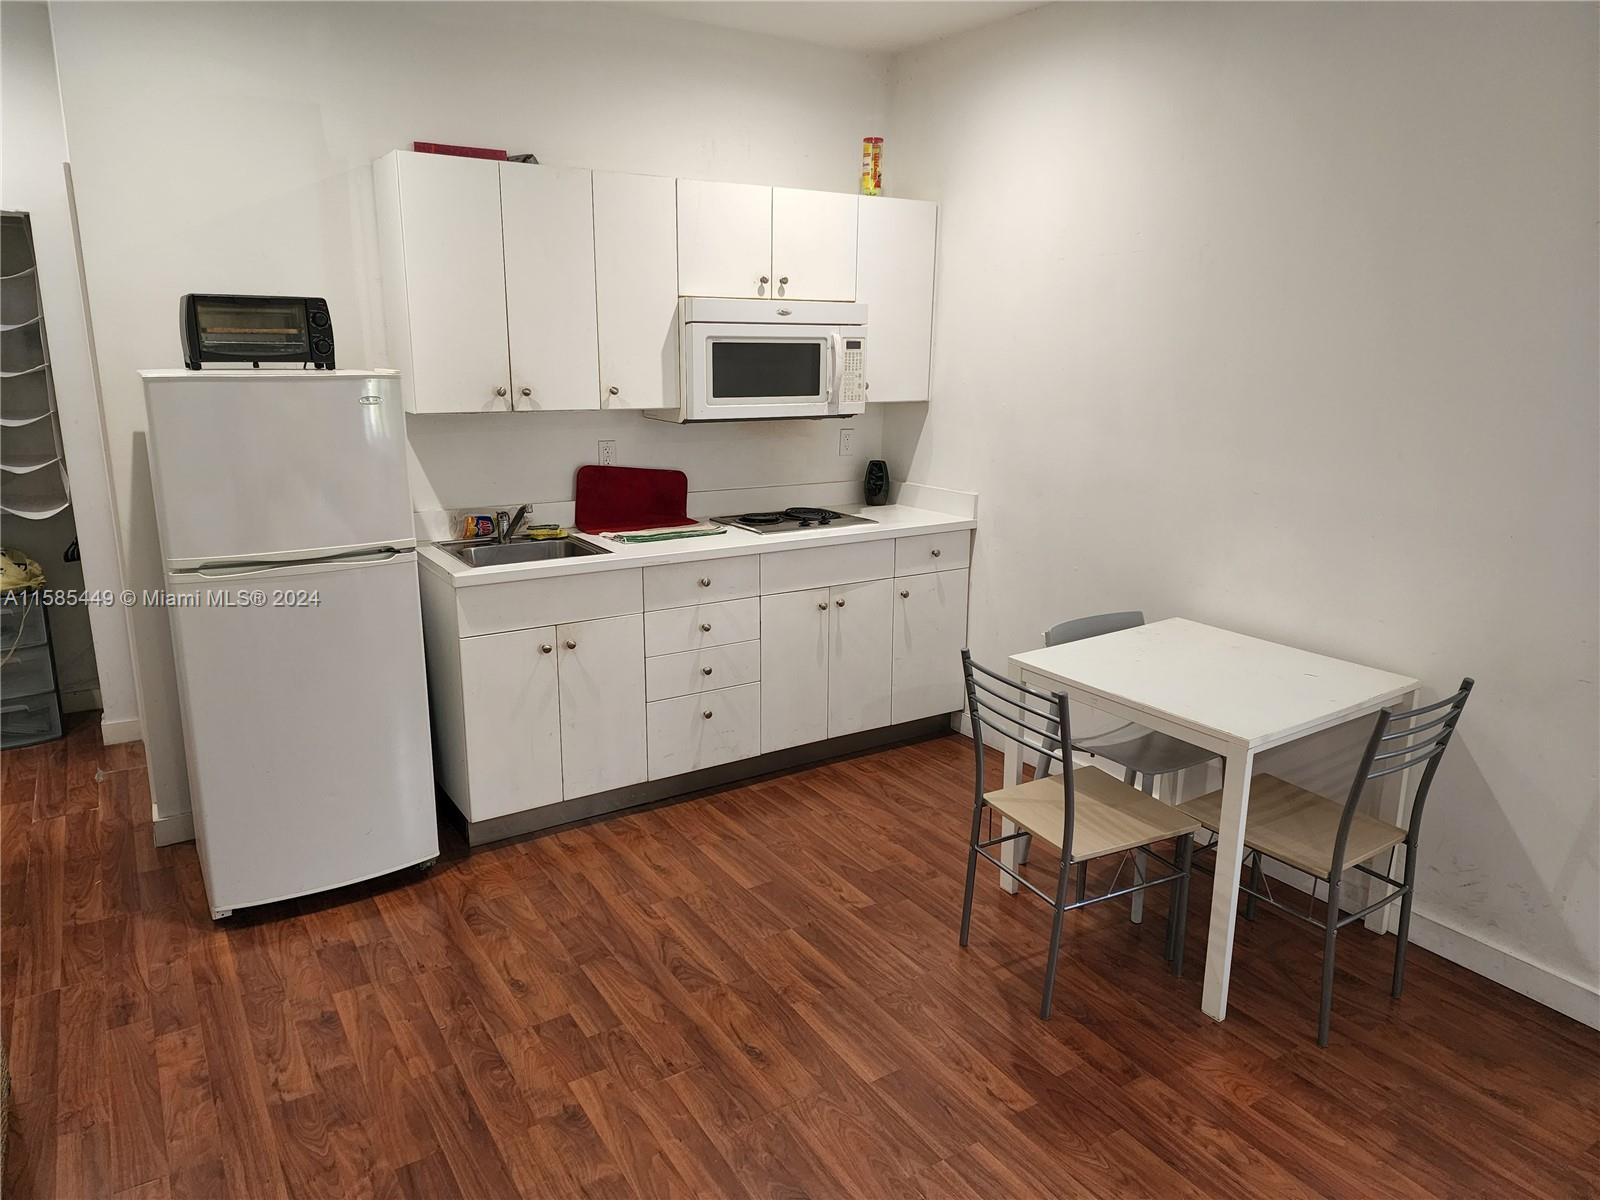 a white kitchen with wooden floors and white appliances